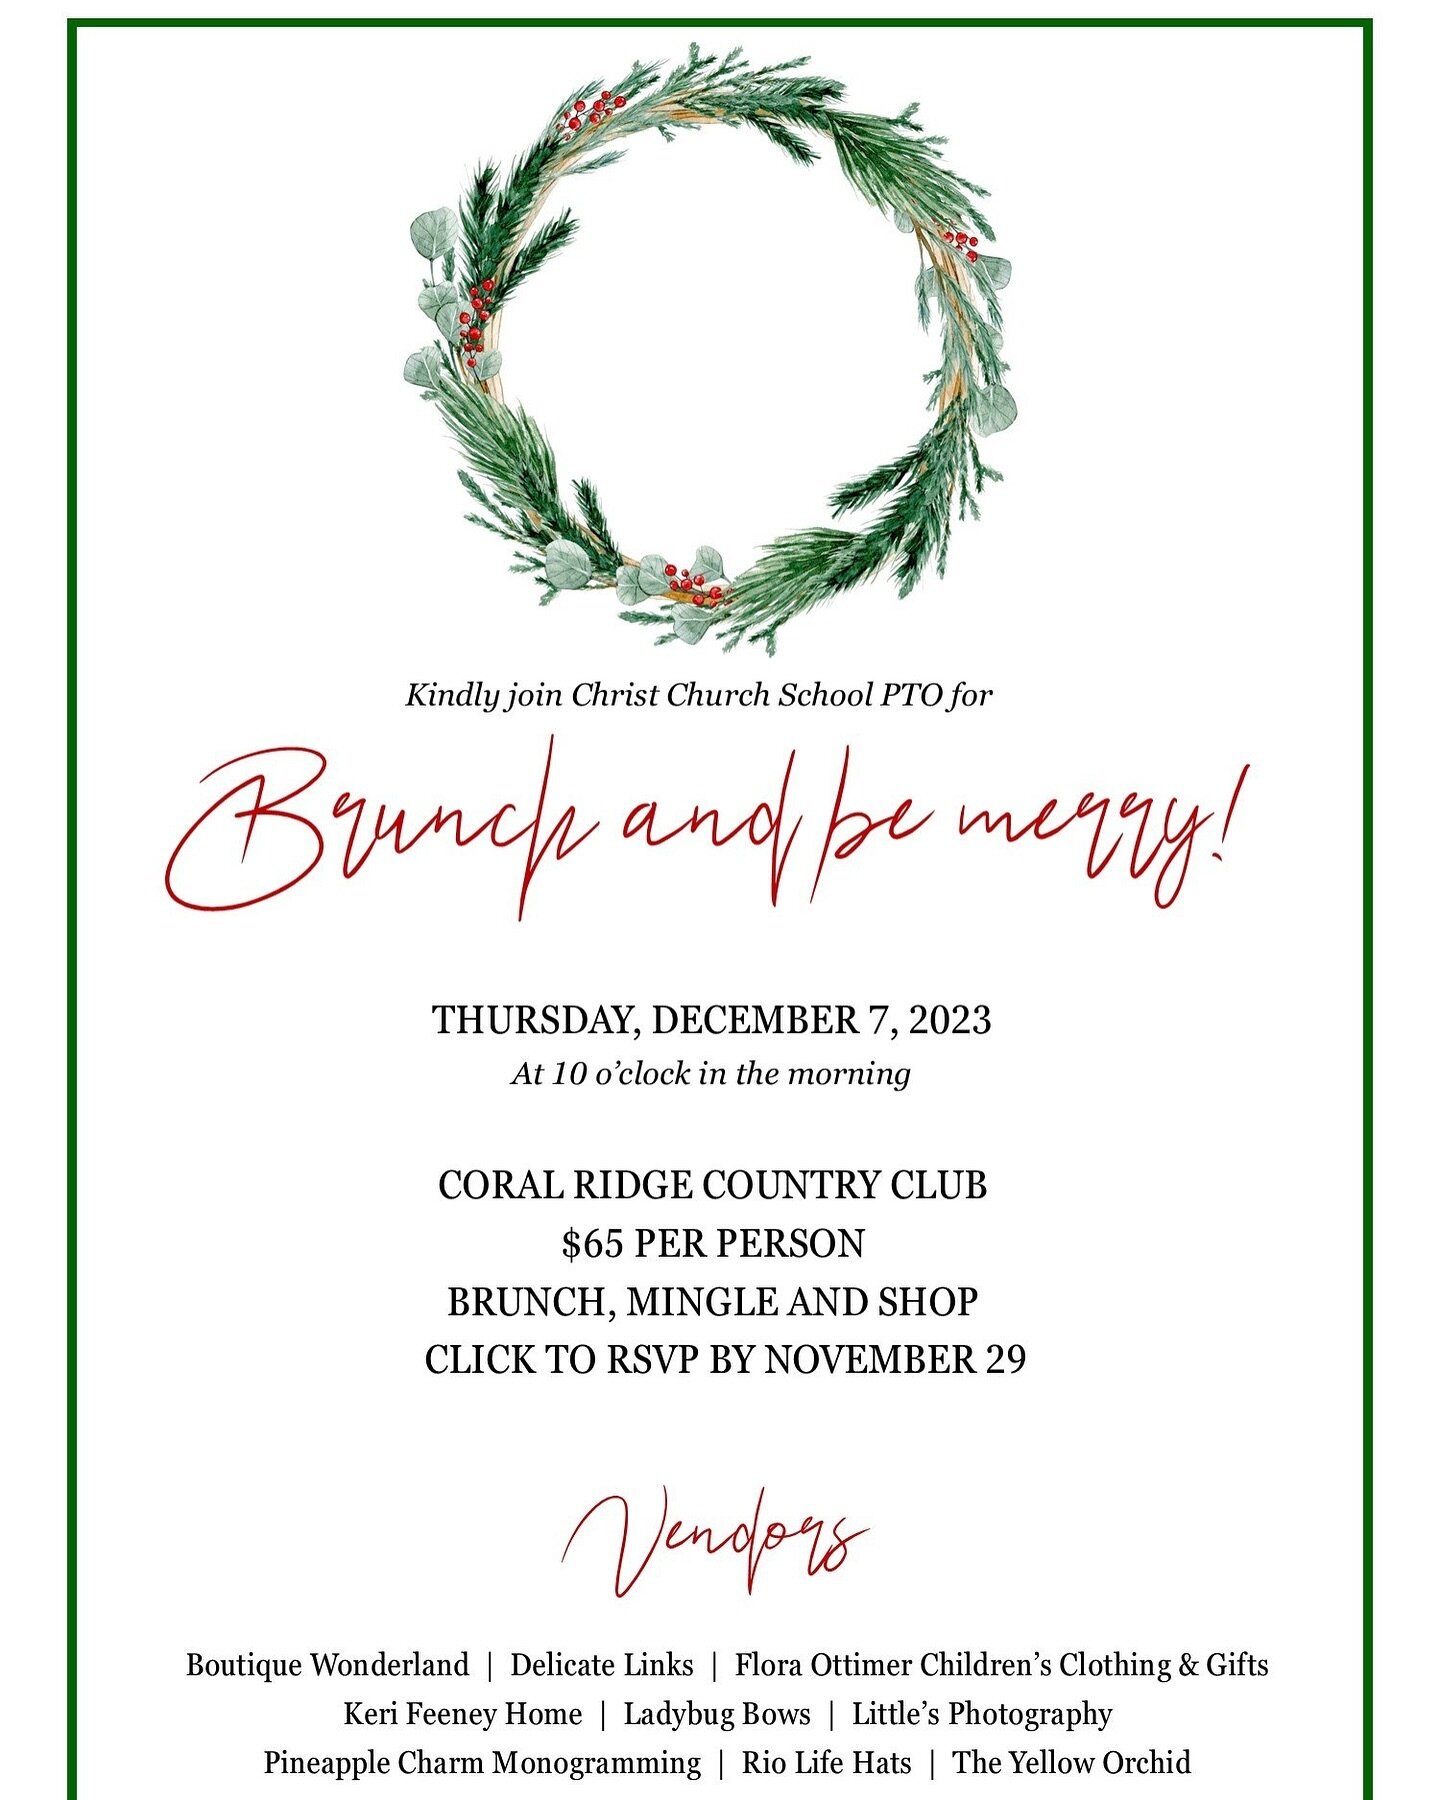 This week is super busy for our shop, on Thursday we will be joining the @christchurchschoolfl families to shop and brunch! 
Can&rsquo;t wait to see you all there 🎁🎄🎅🏻